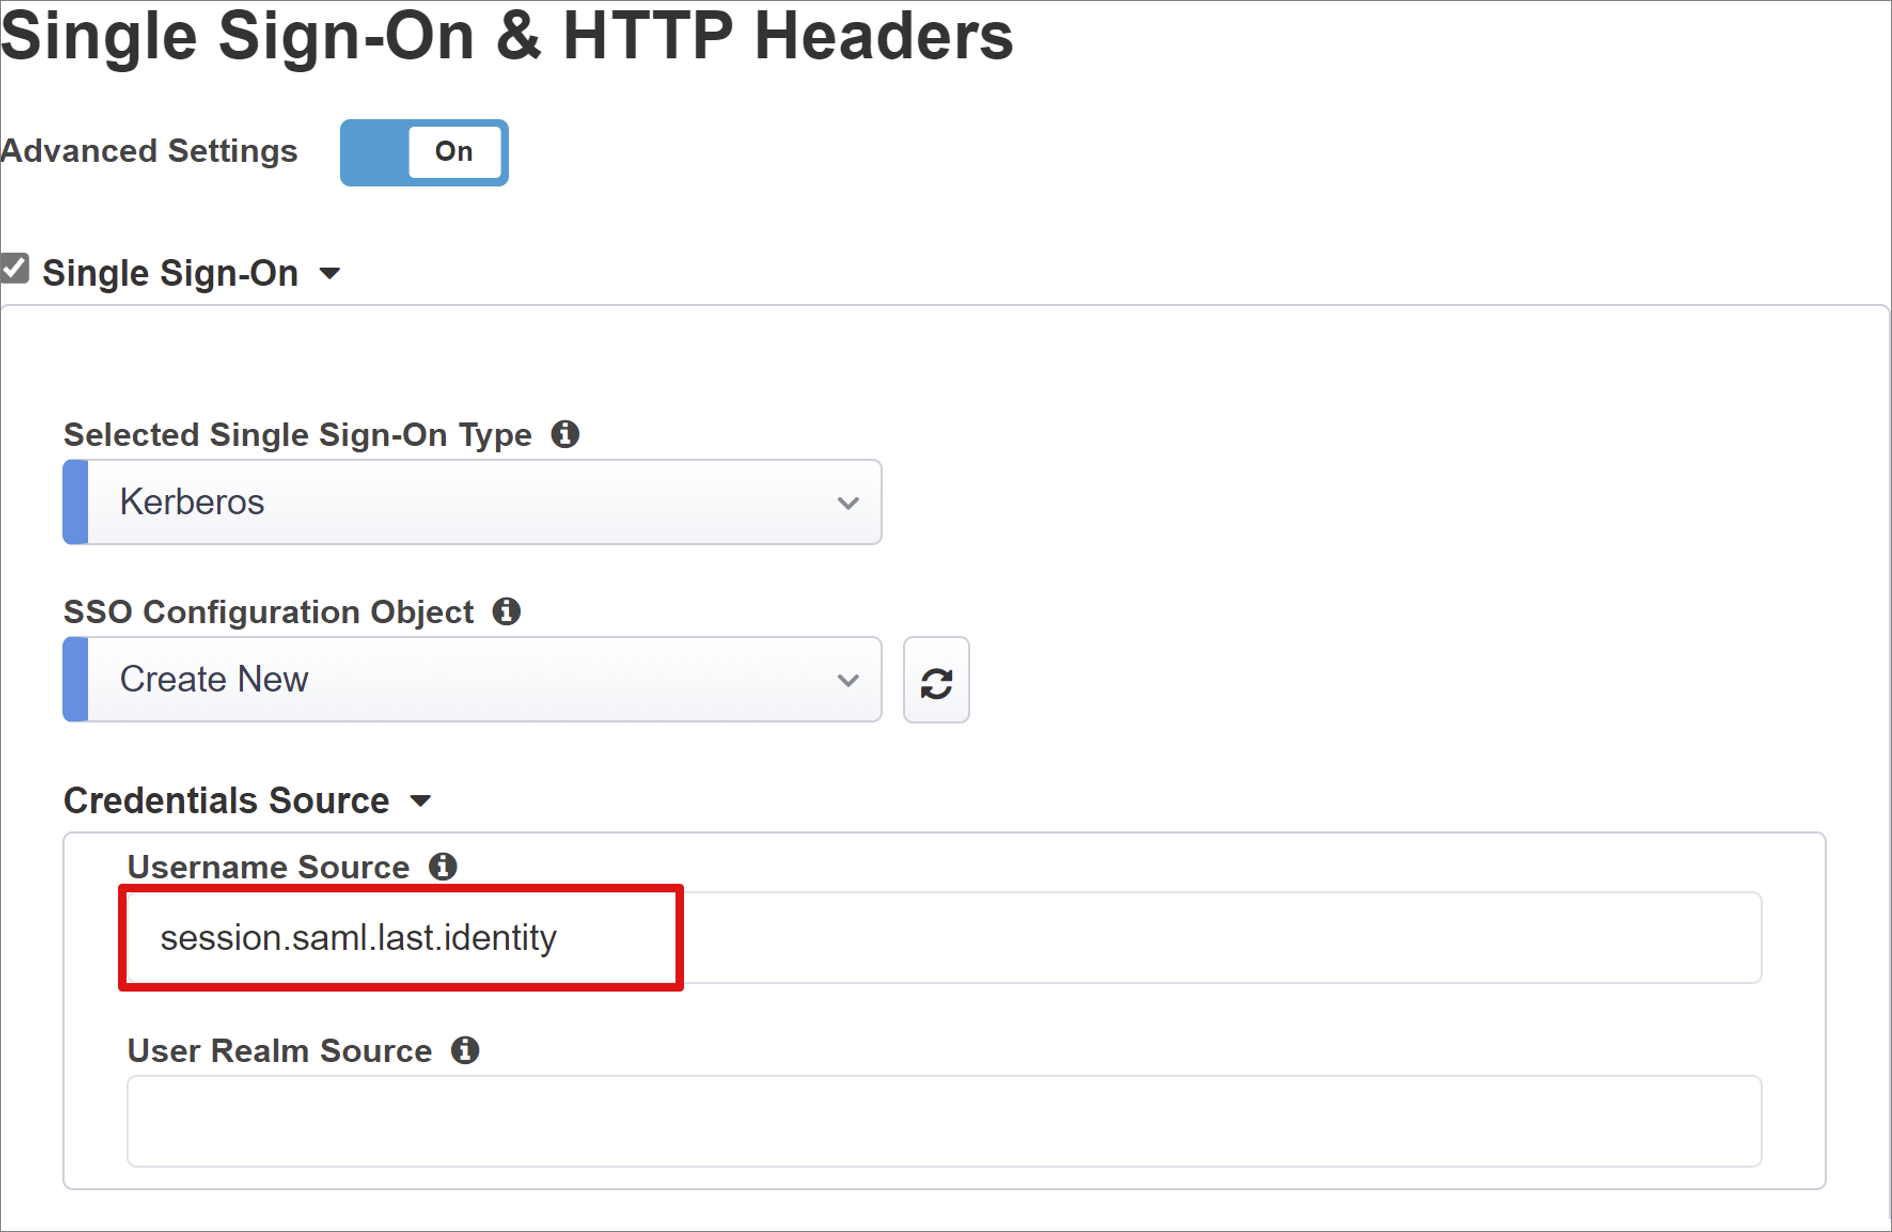 Screenshot of the Username Source entry on Single Sign On and HTTP Headers.